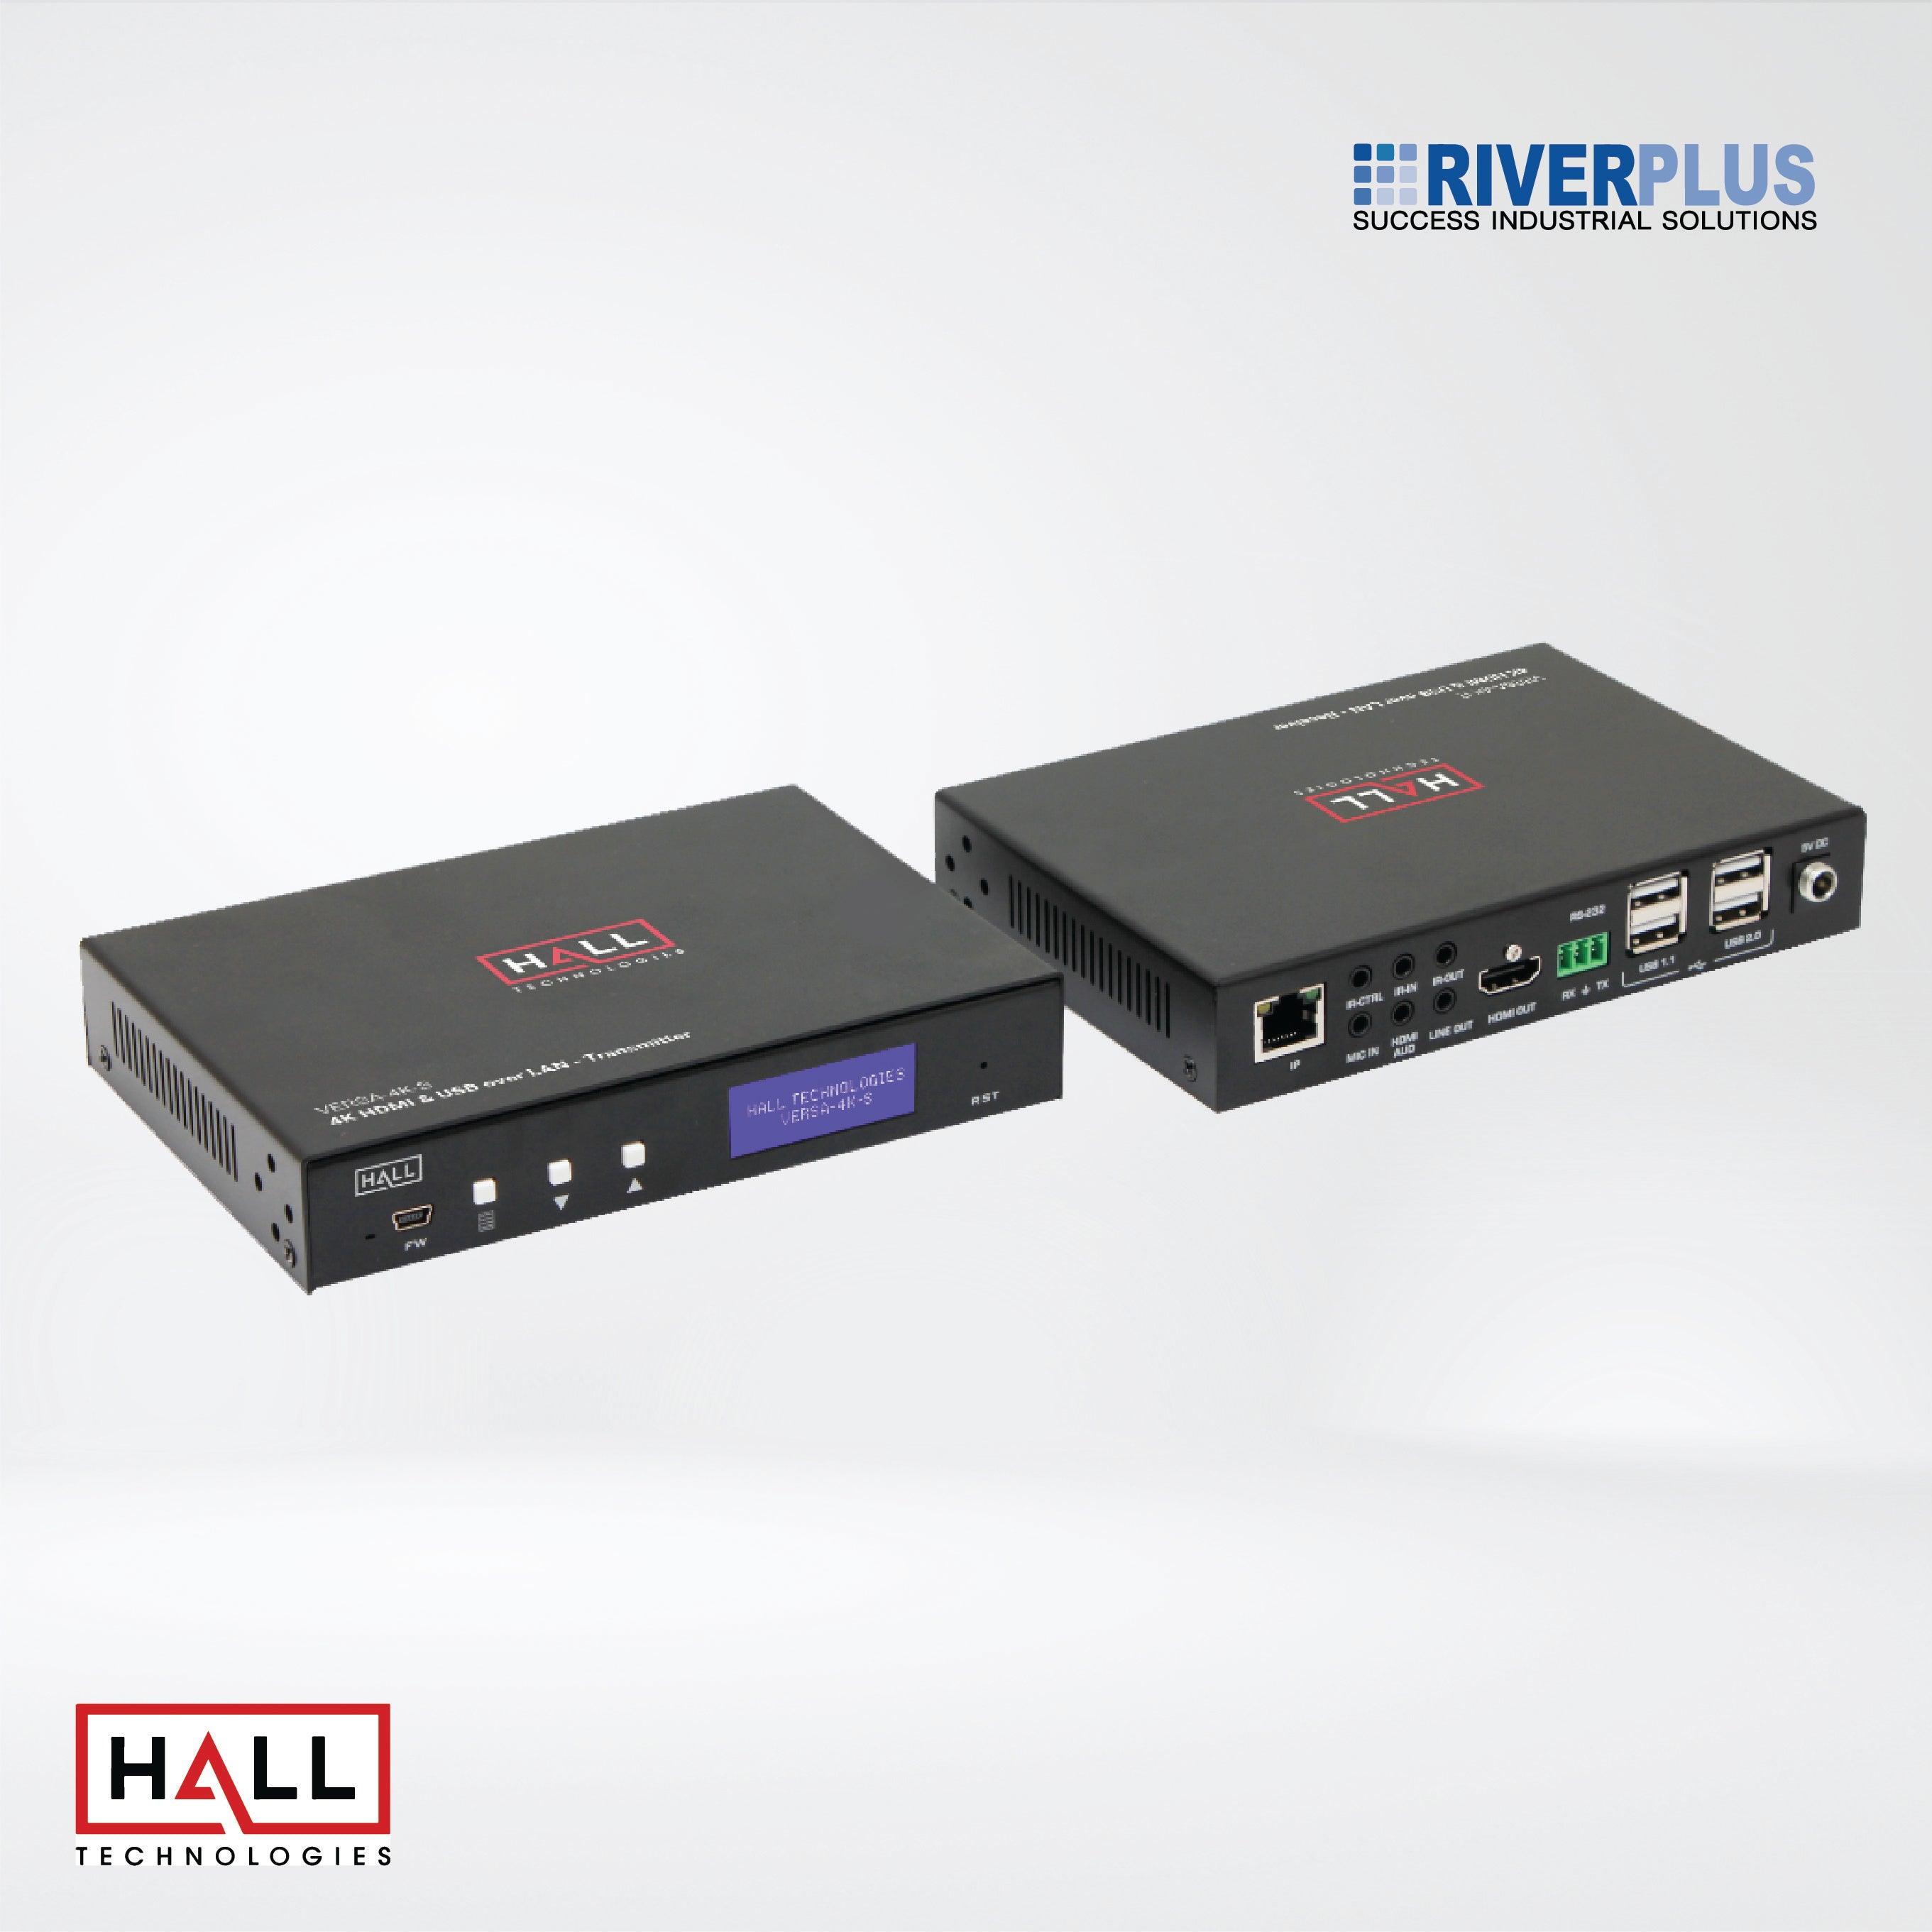 VERSA-4K-R 4K Video & USB Extension for Point-to-Point or Matrix over IP - Riverplus